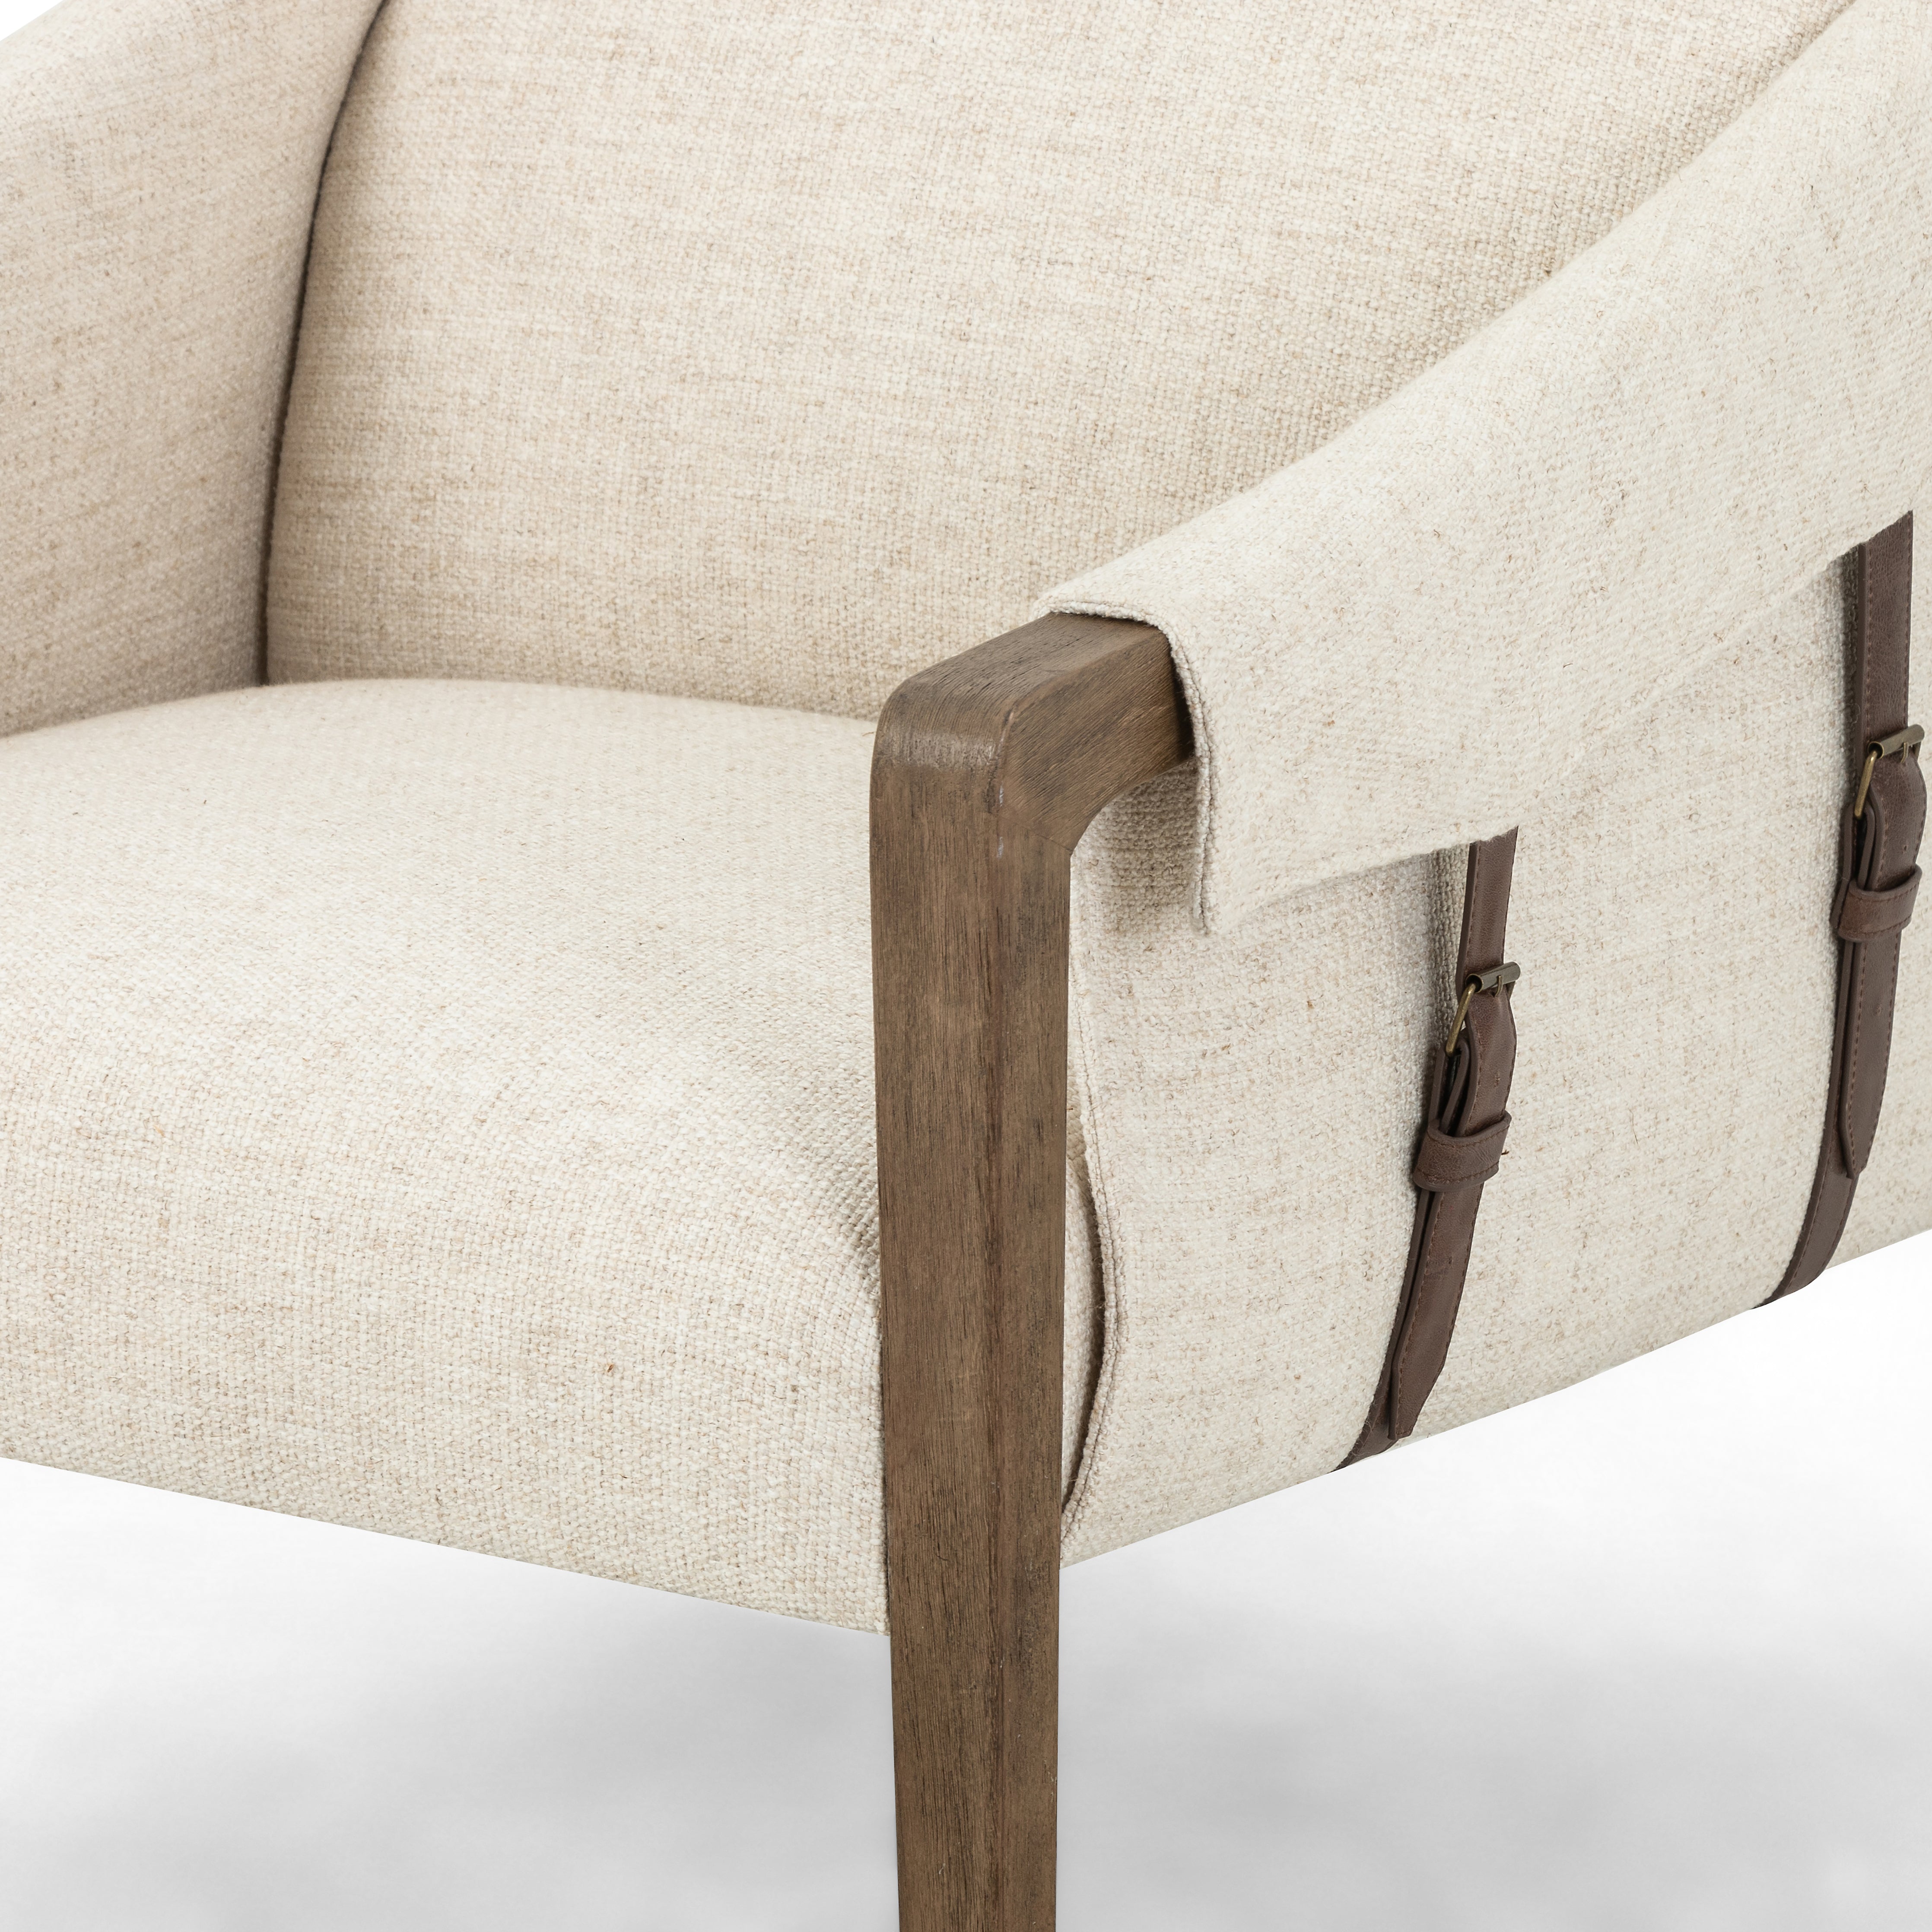 Thames Cream Fabric &amp; Sonoma Coco Leather with Distressed Natural Parawood | Bauer Chair | Valley Ridge Furniture